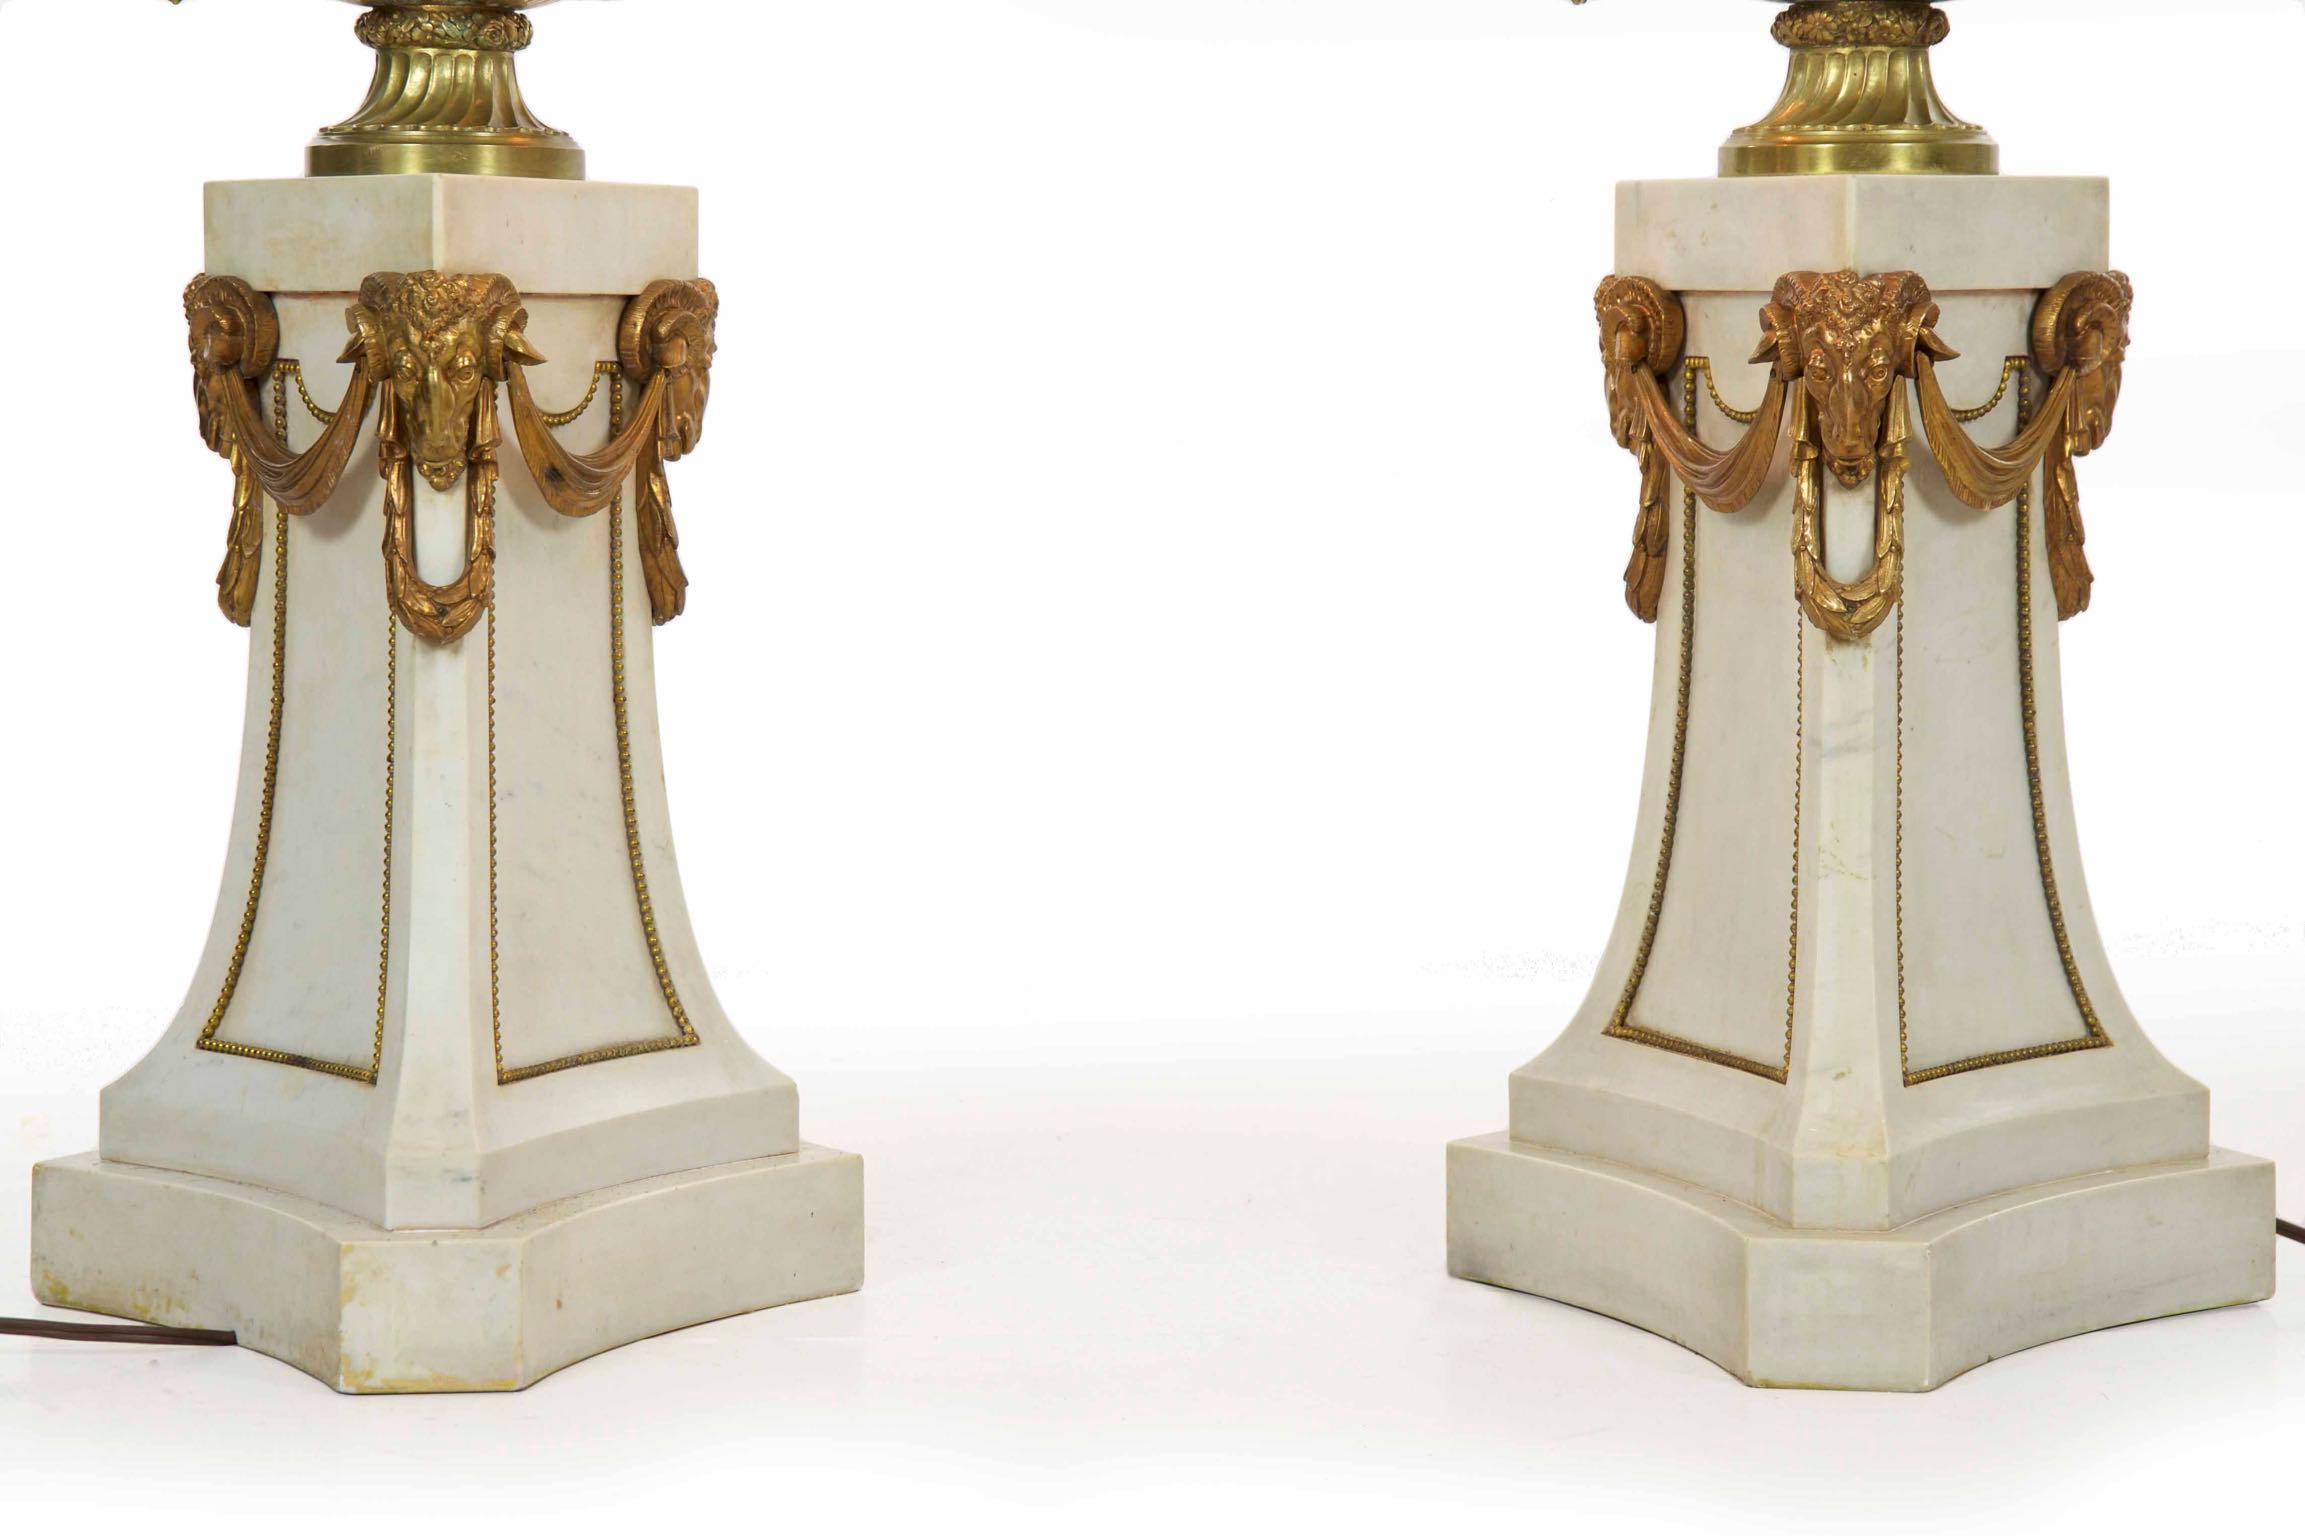 Belle Époque Pair of French Neoclassical Antique Marble Floor Candelabra Lamps, 20th Century